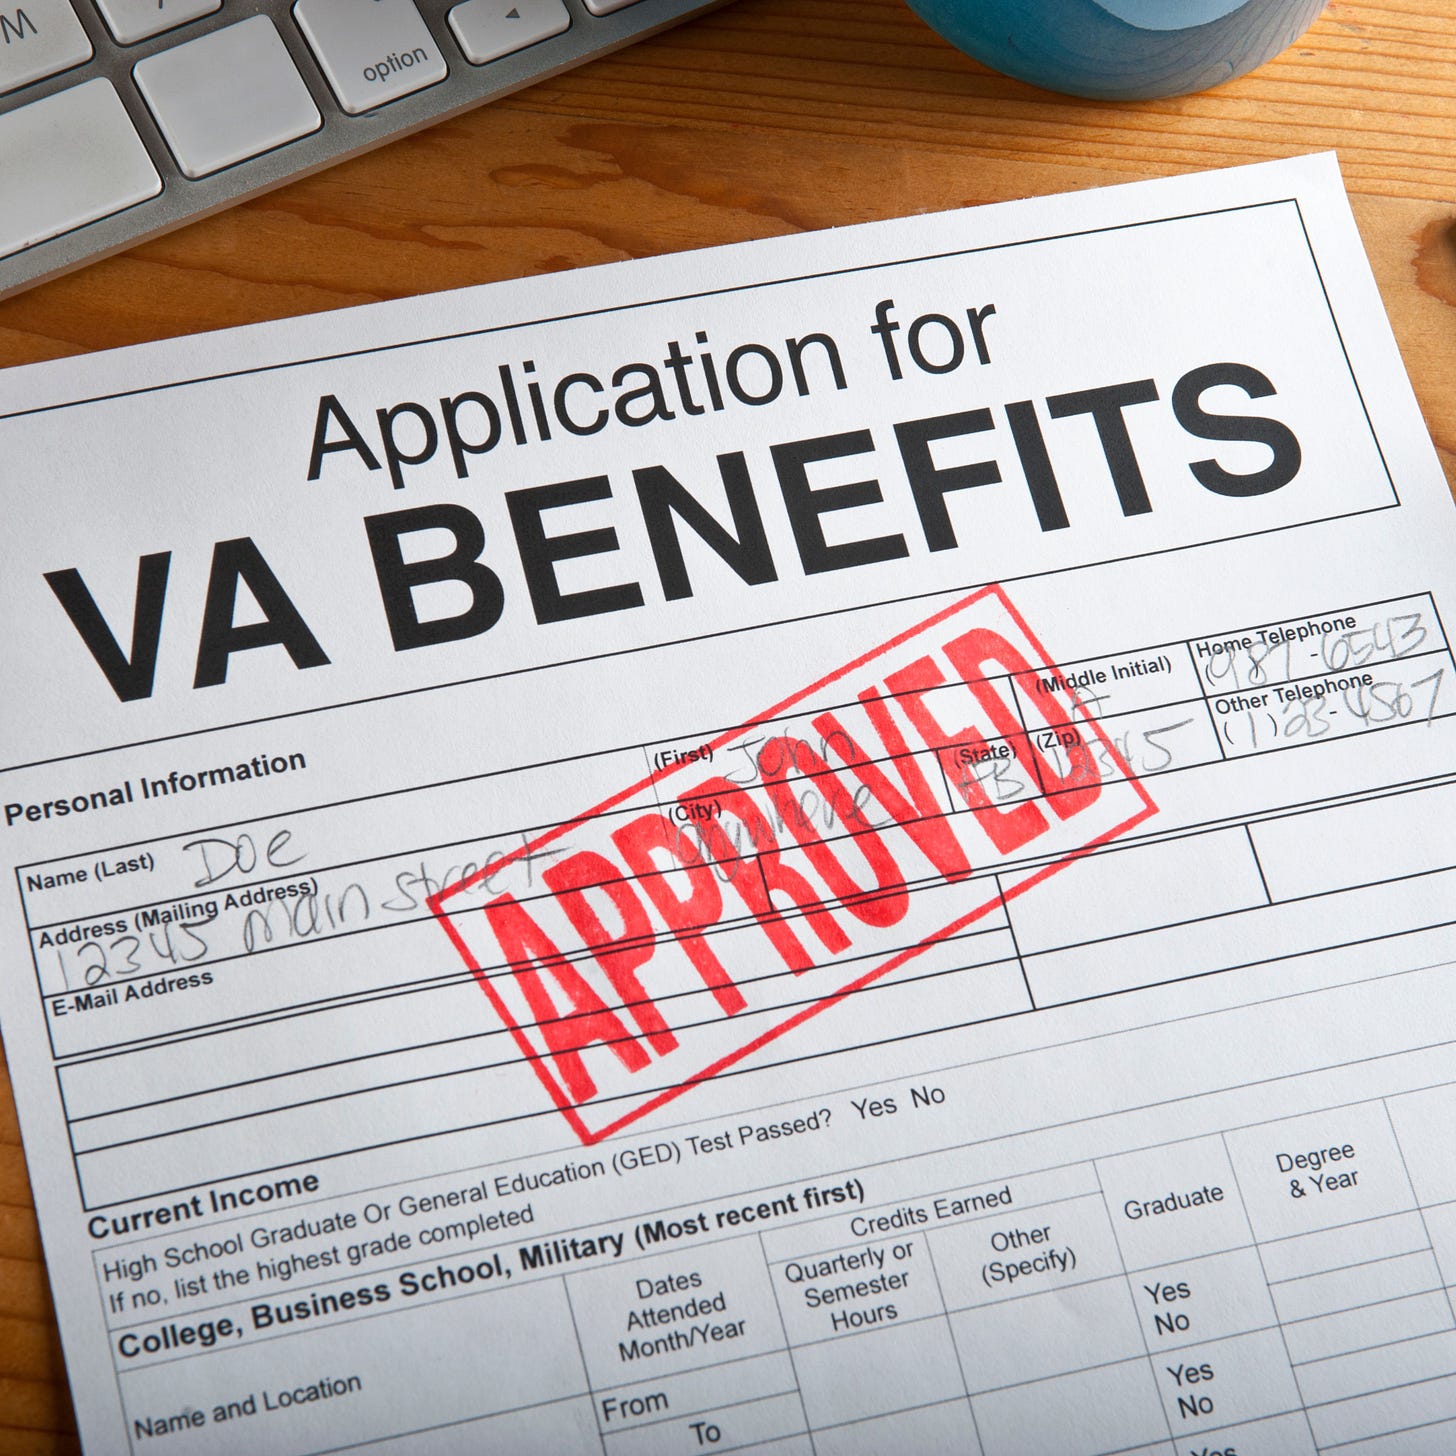  Navigating the VA Benefits System: A Guide for Veterans in Transition